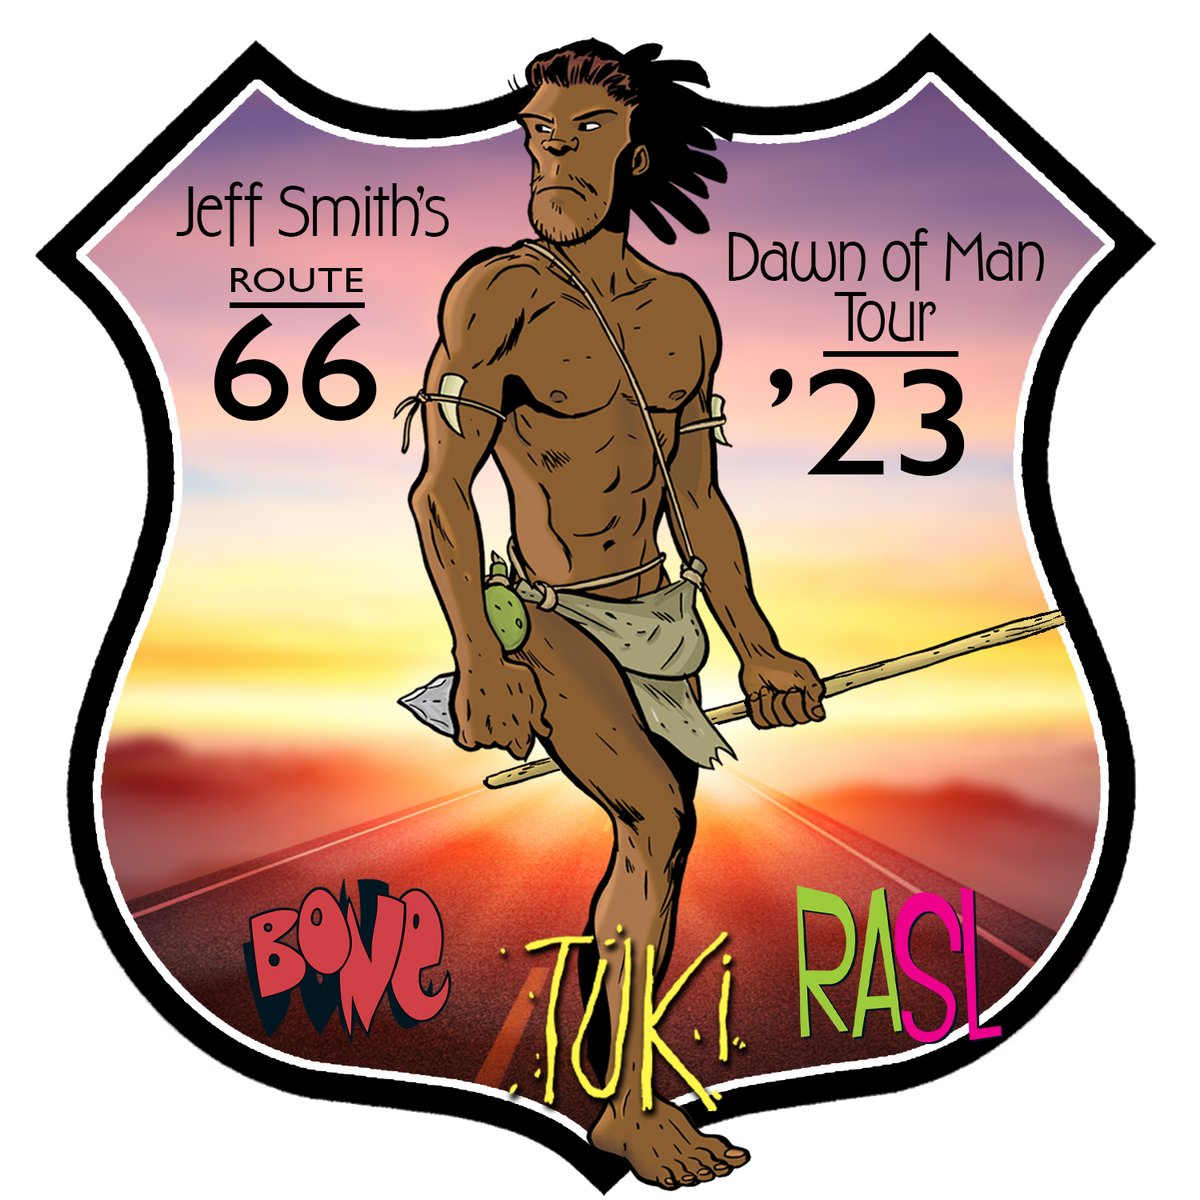 Dawn of Man Tour 2023 - A Look Back One year ago, @jeffsmithsbone embarked on a multi-city tour to promote TUKI- a planned 6 part GN series, w vol 3 in progress. Take a look back as we reminisce on this wild adventure down America's oldest highway! youtu.be/g0v0FkmE5q0